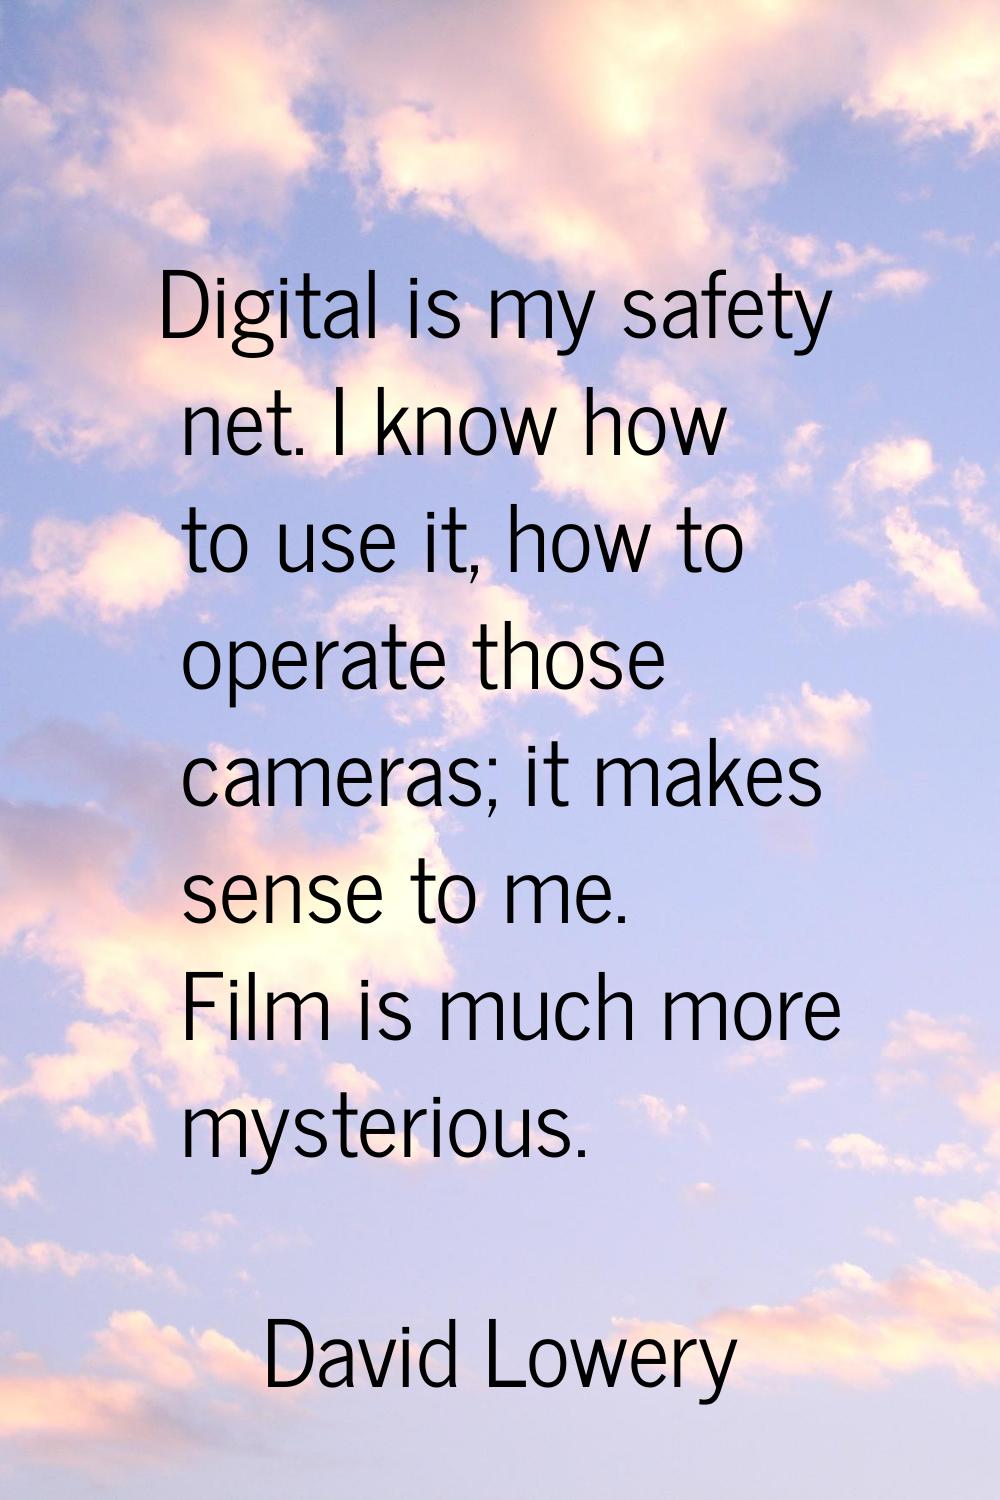 Digital is my safety net. I know how to use it, how to operate those cameras; it makes sense to me.